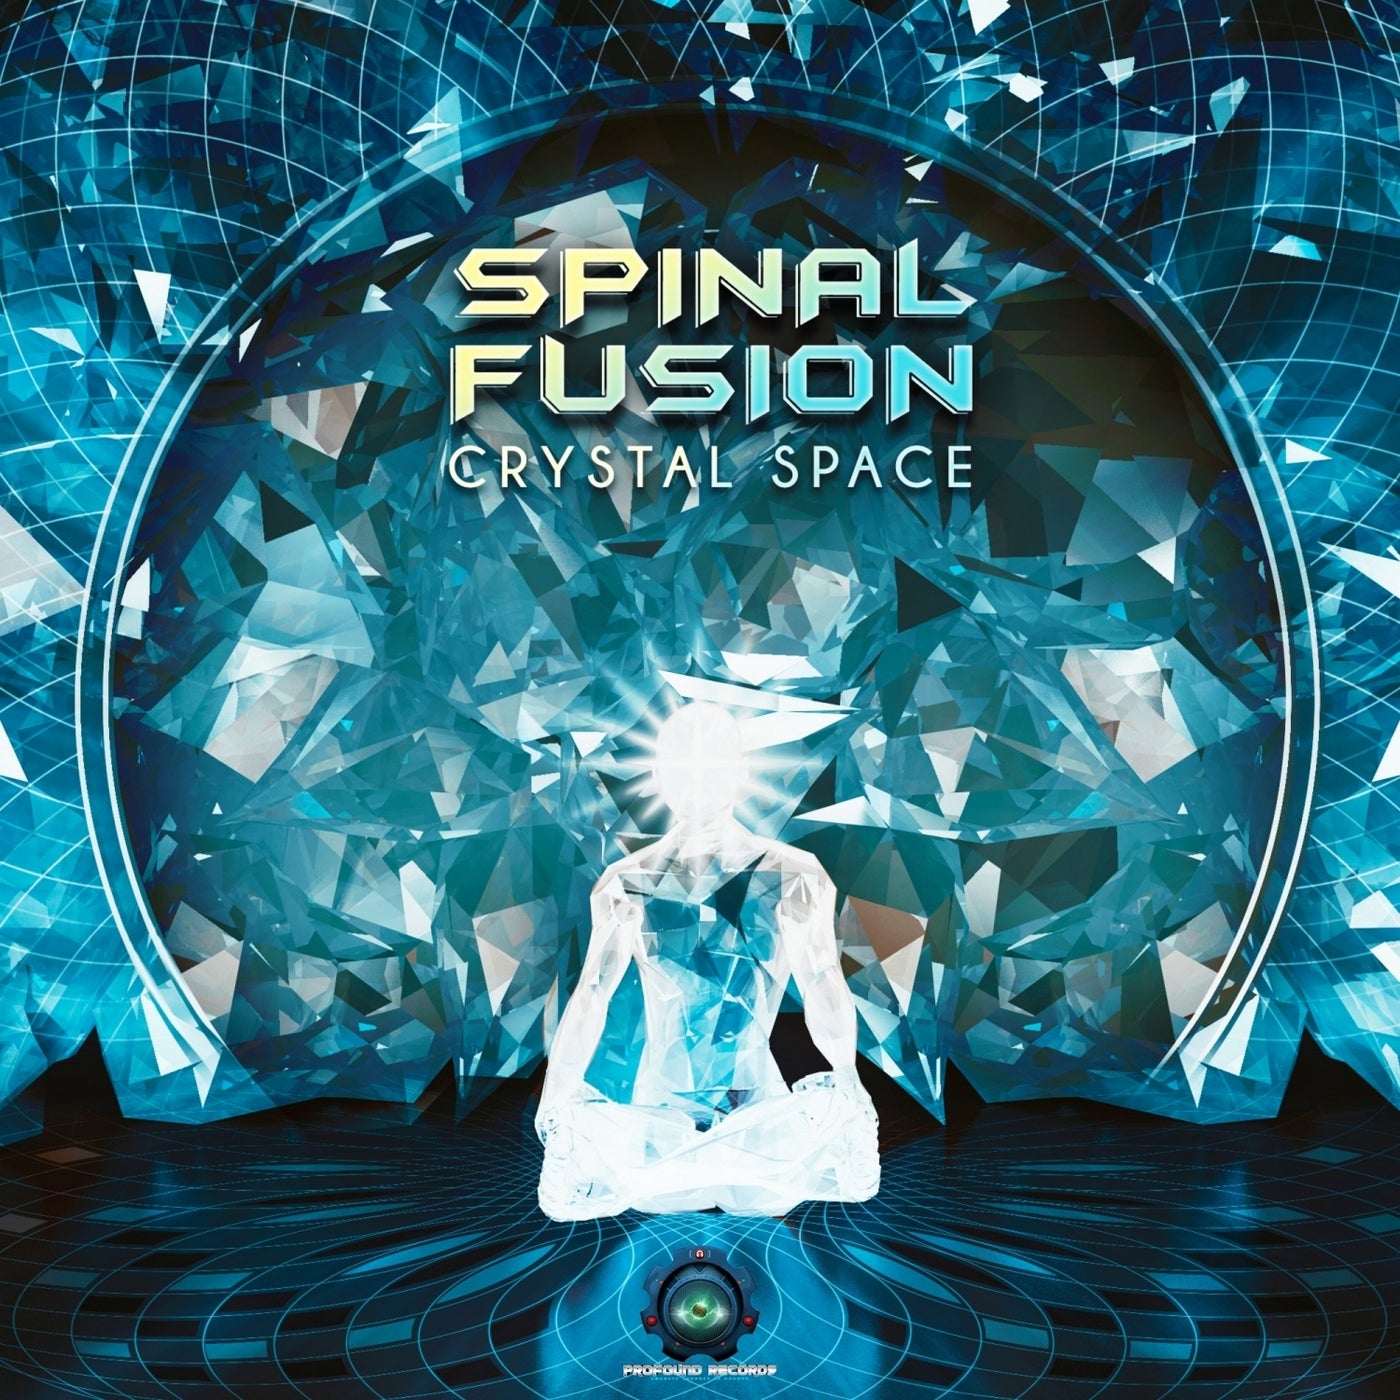 Span space. Cosmic Crystal. Crystal Remix. Spinal Fusion Psy Trance.